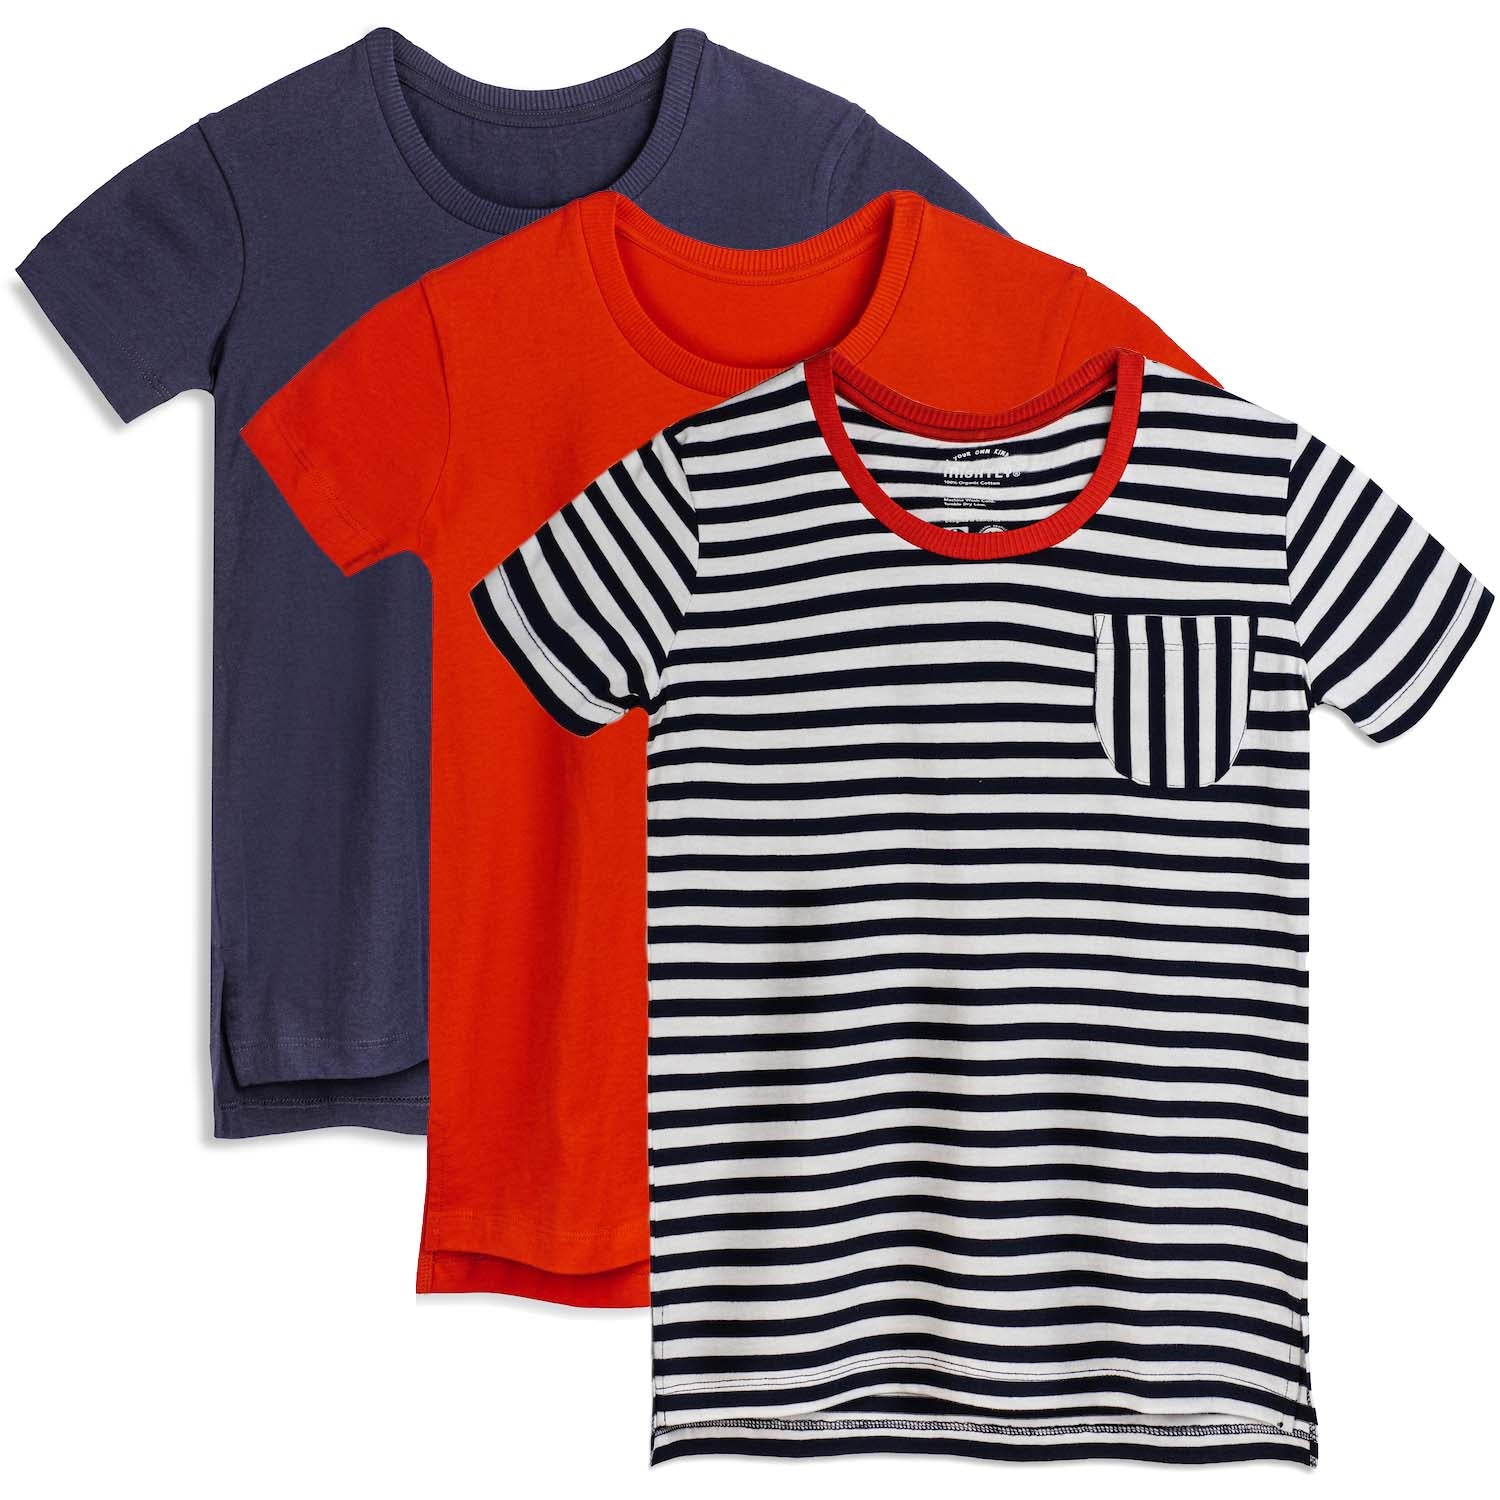 Organic Cotton Kids Shirts - 3 T-Shirts Pack - Extended Length Mightly